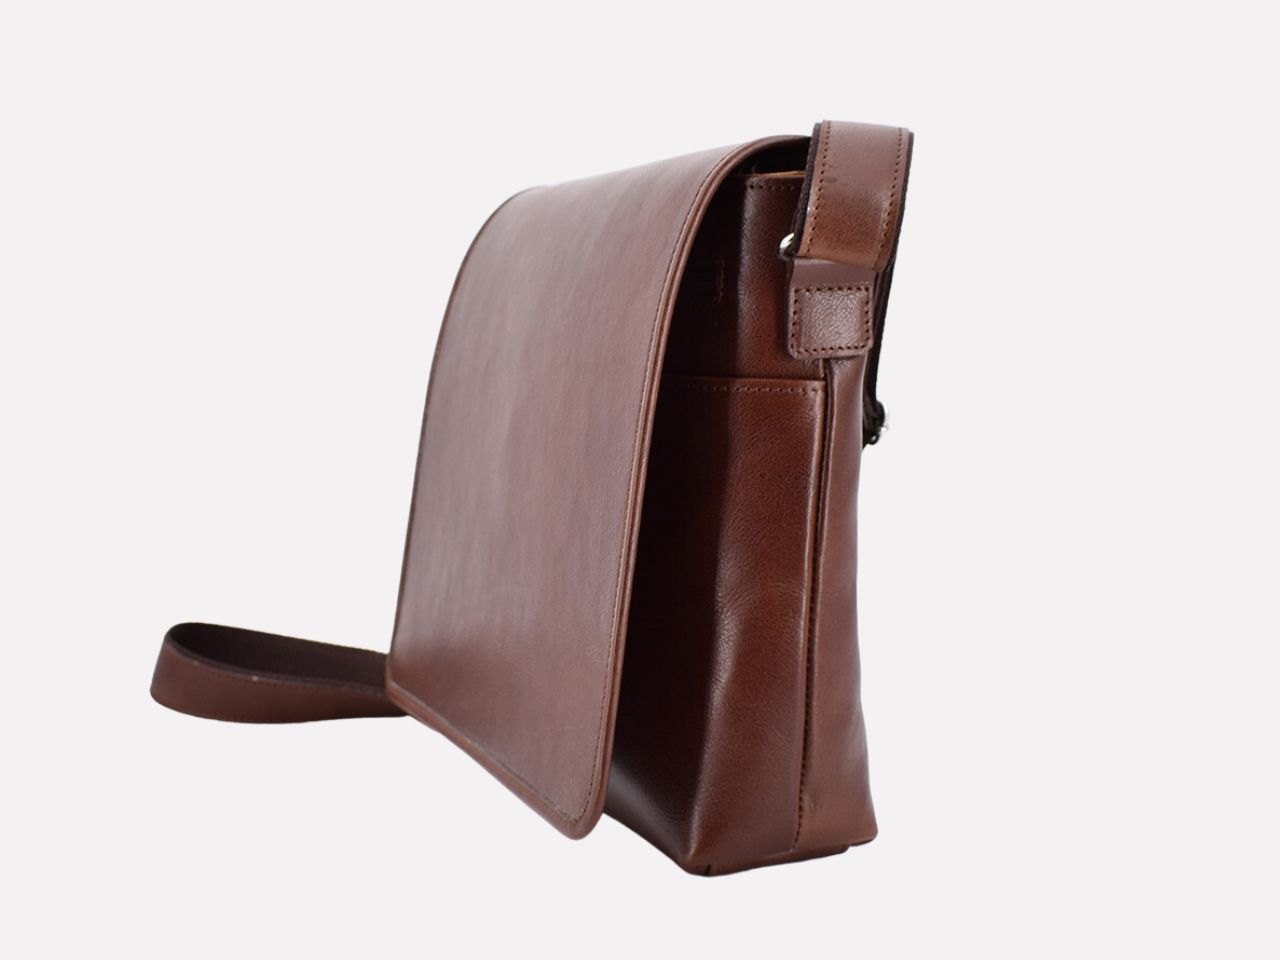 Pax, Italian leather messenger bag designed and handcrafted in Rome by Riccardo Mancini